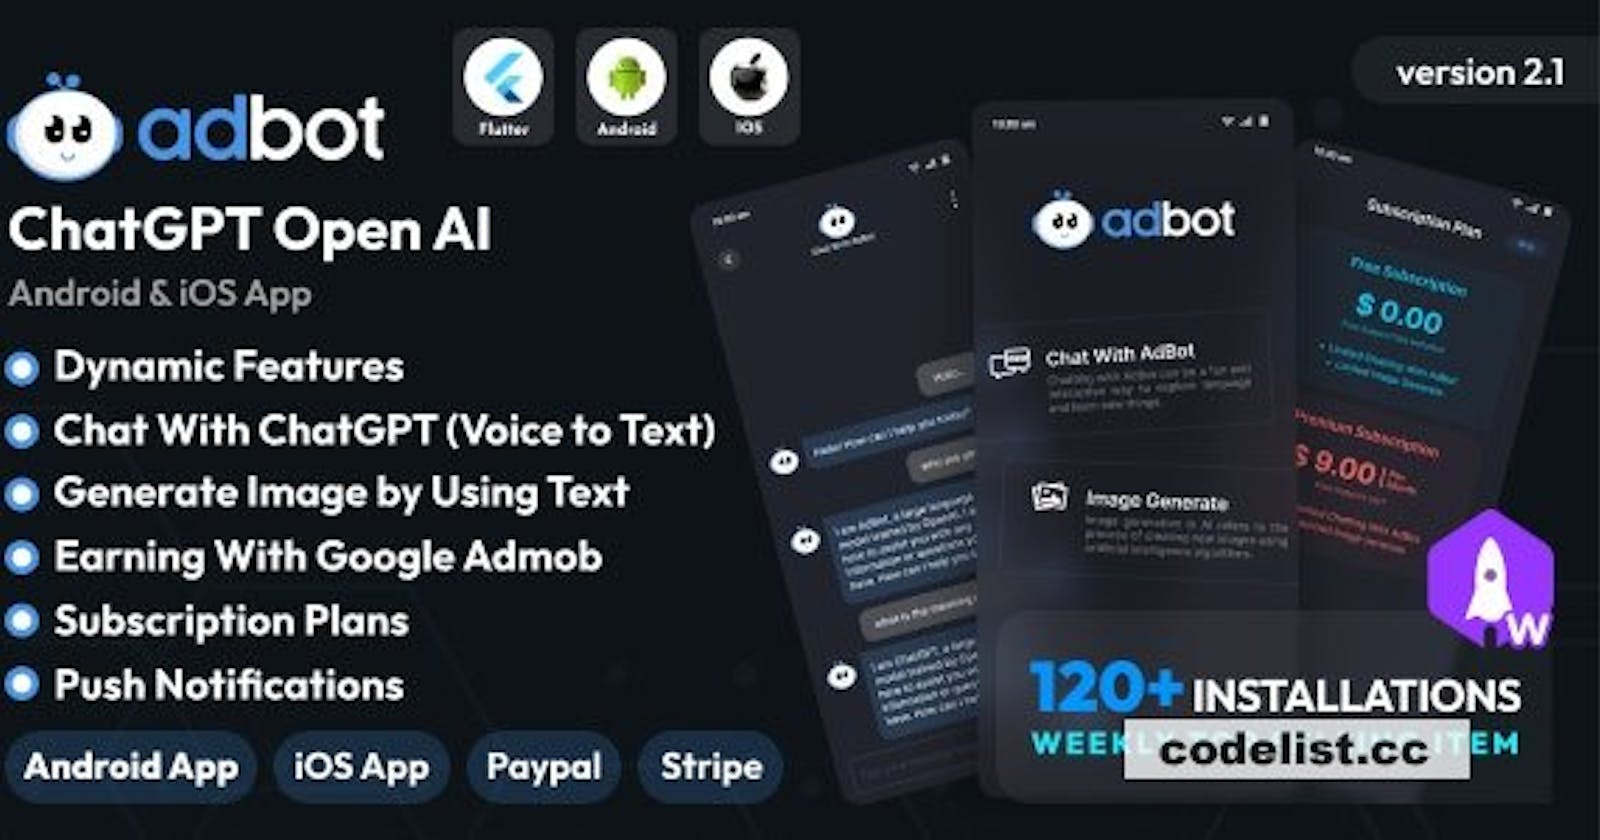 AdBot v1.0 - ChatGPT Open AI Android and iOS App